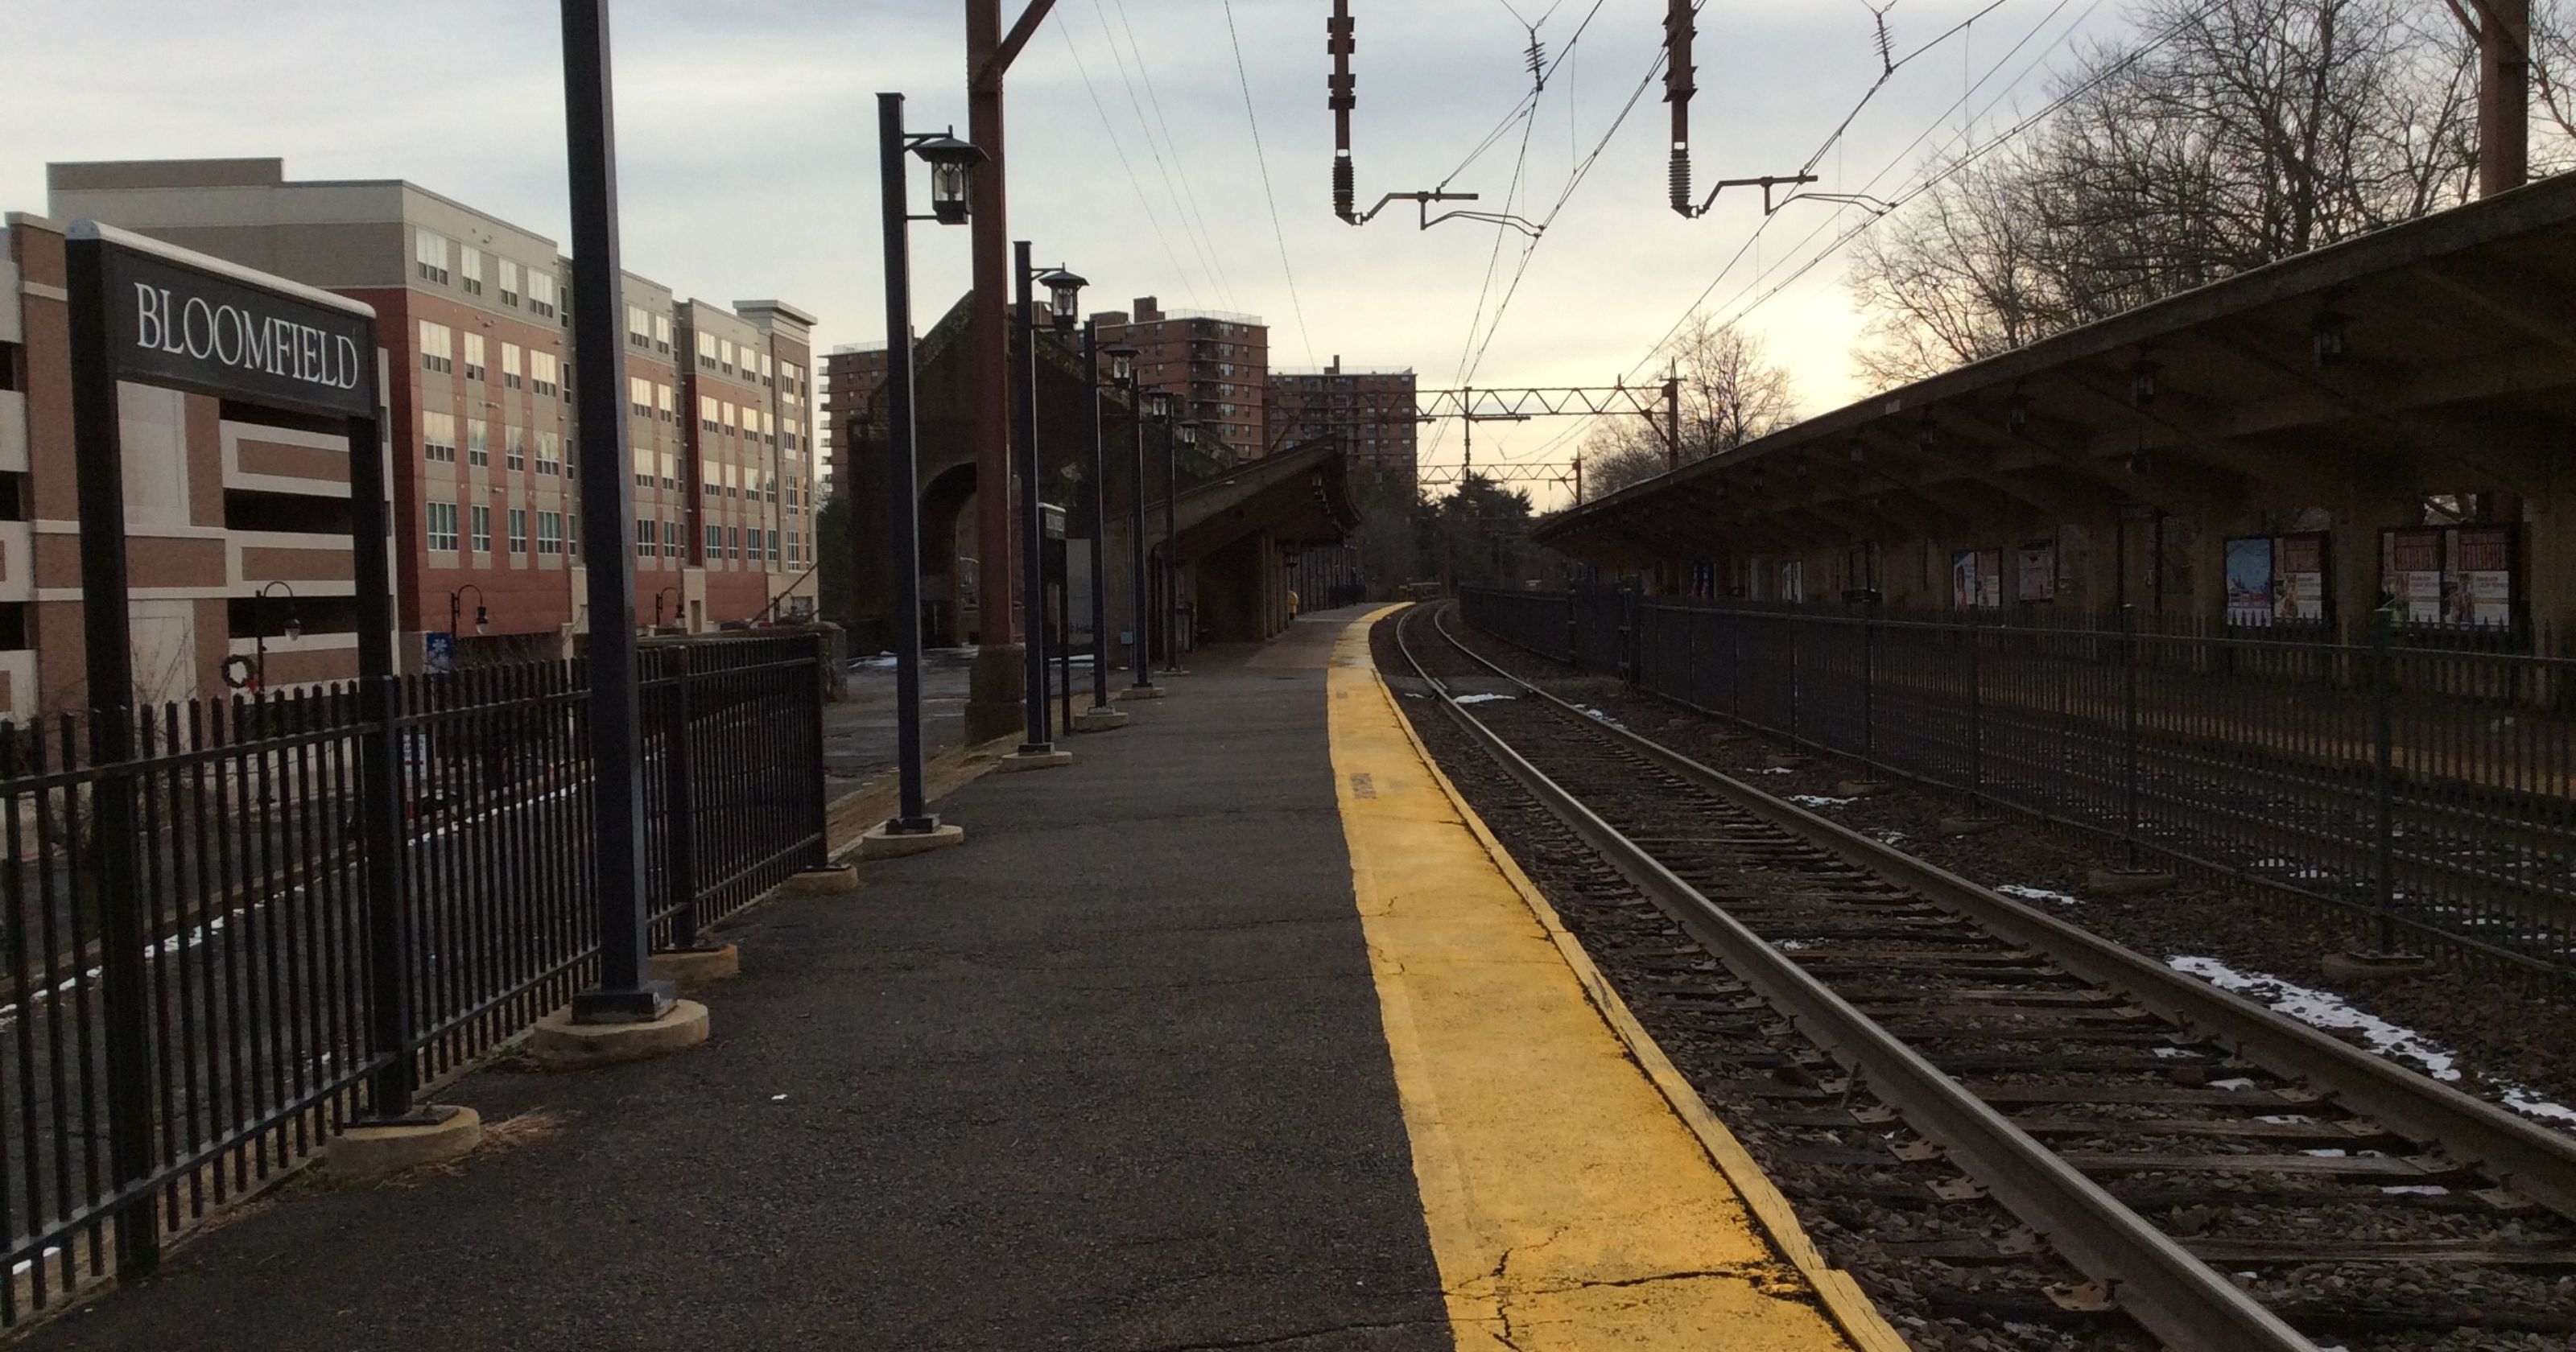 Bloomfield intends to overhaul train station in 2017